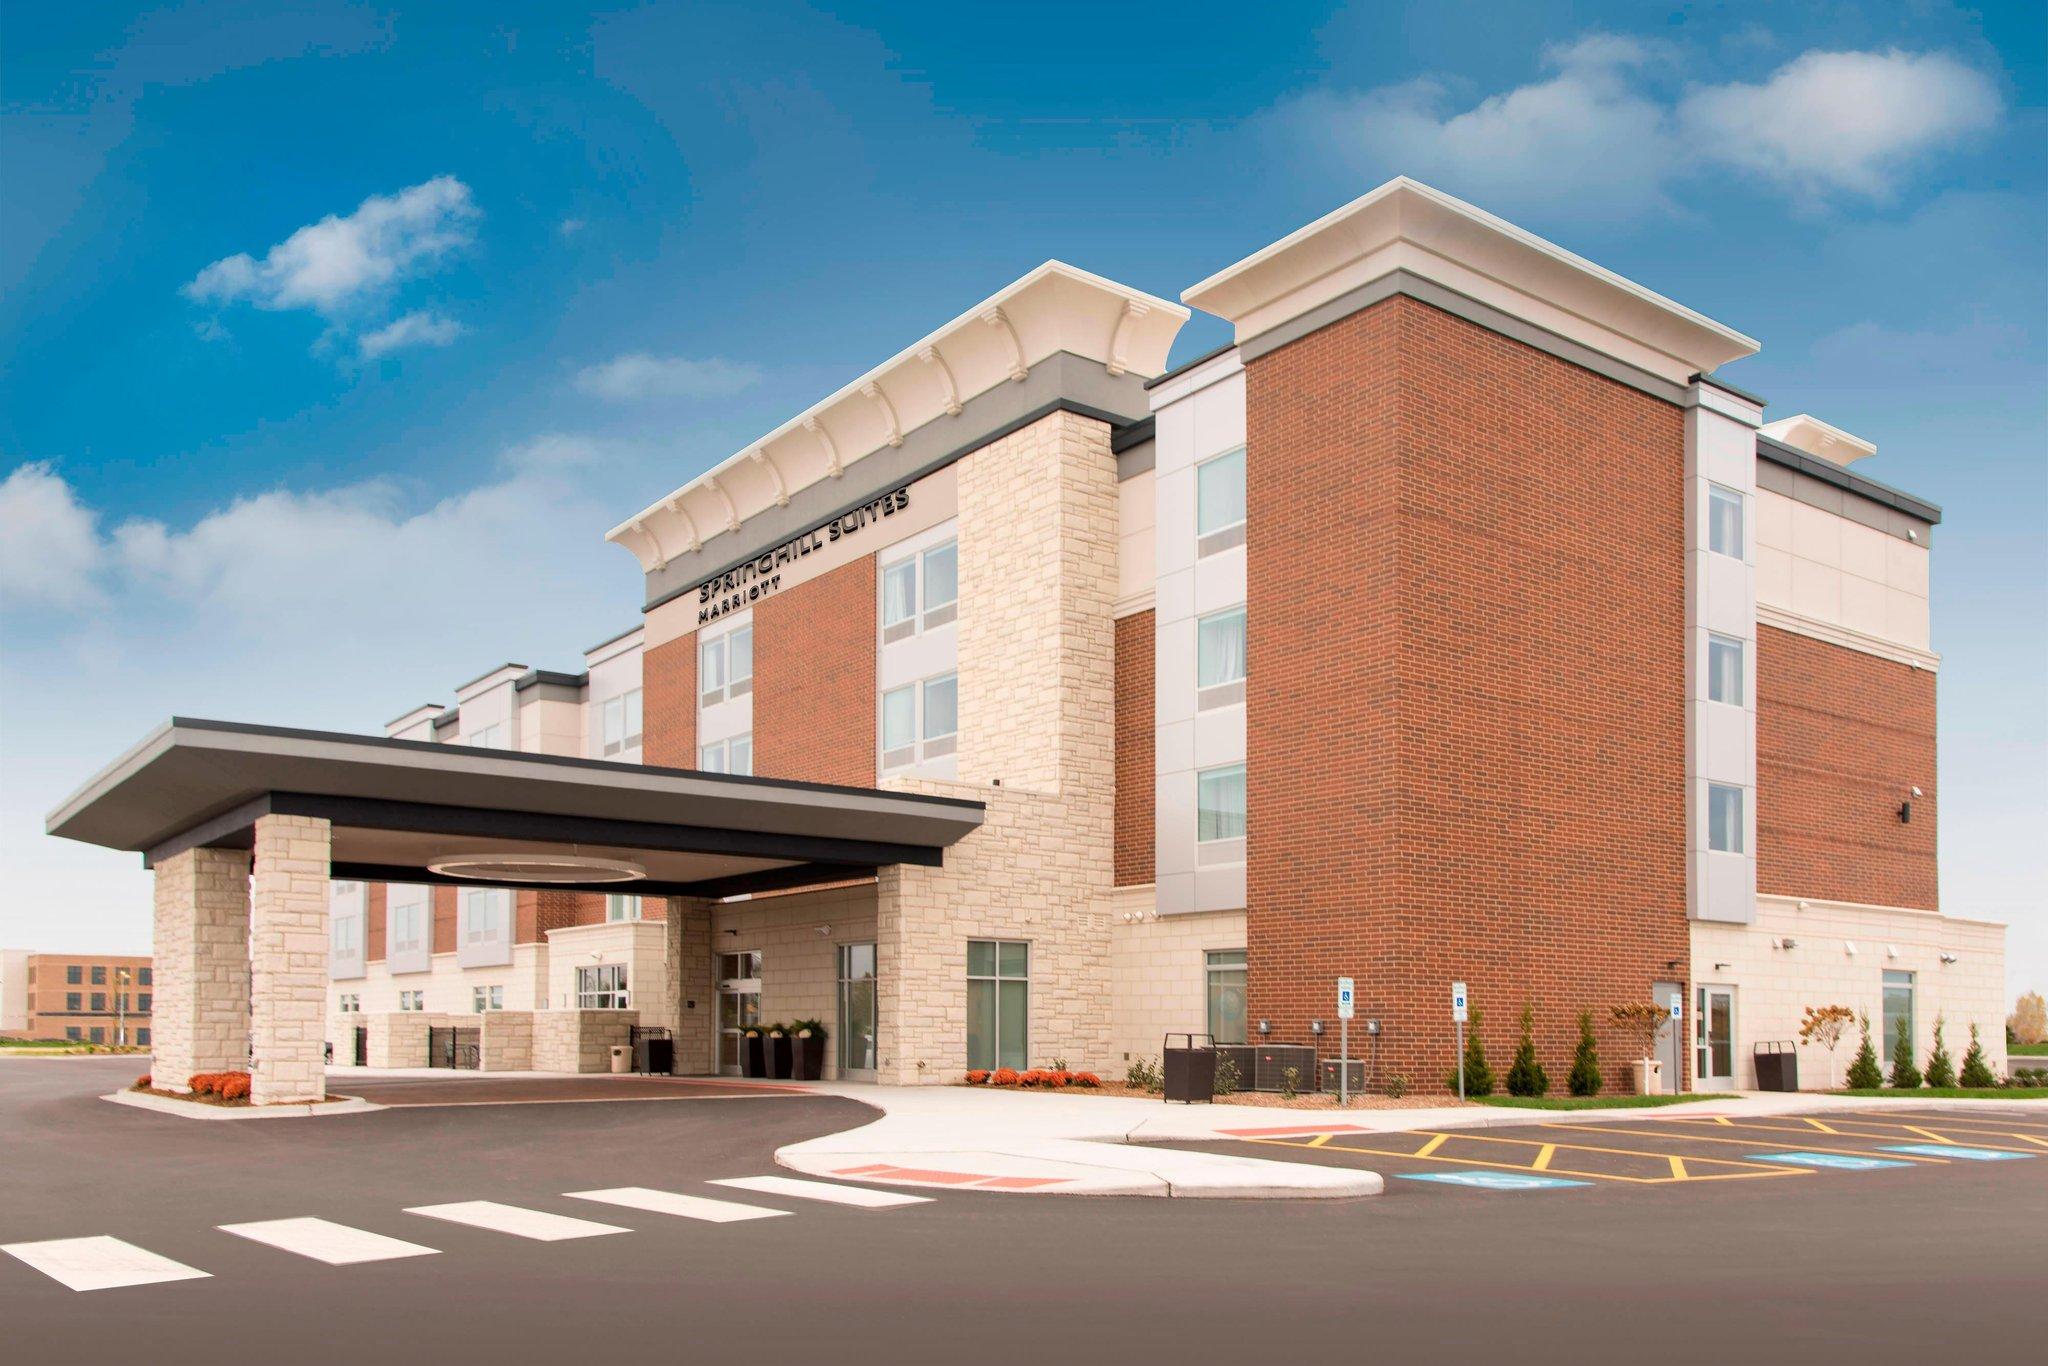 SpringHill Suites Chicago Southeast/Munster, IN in Munster, IN